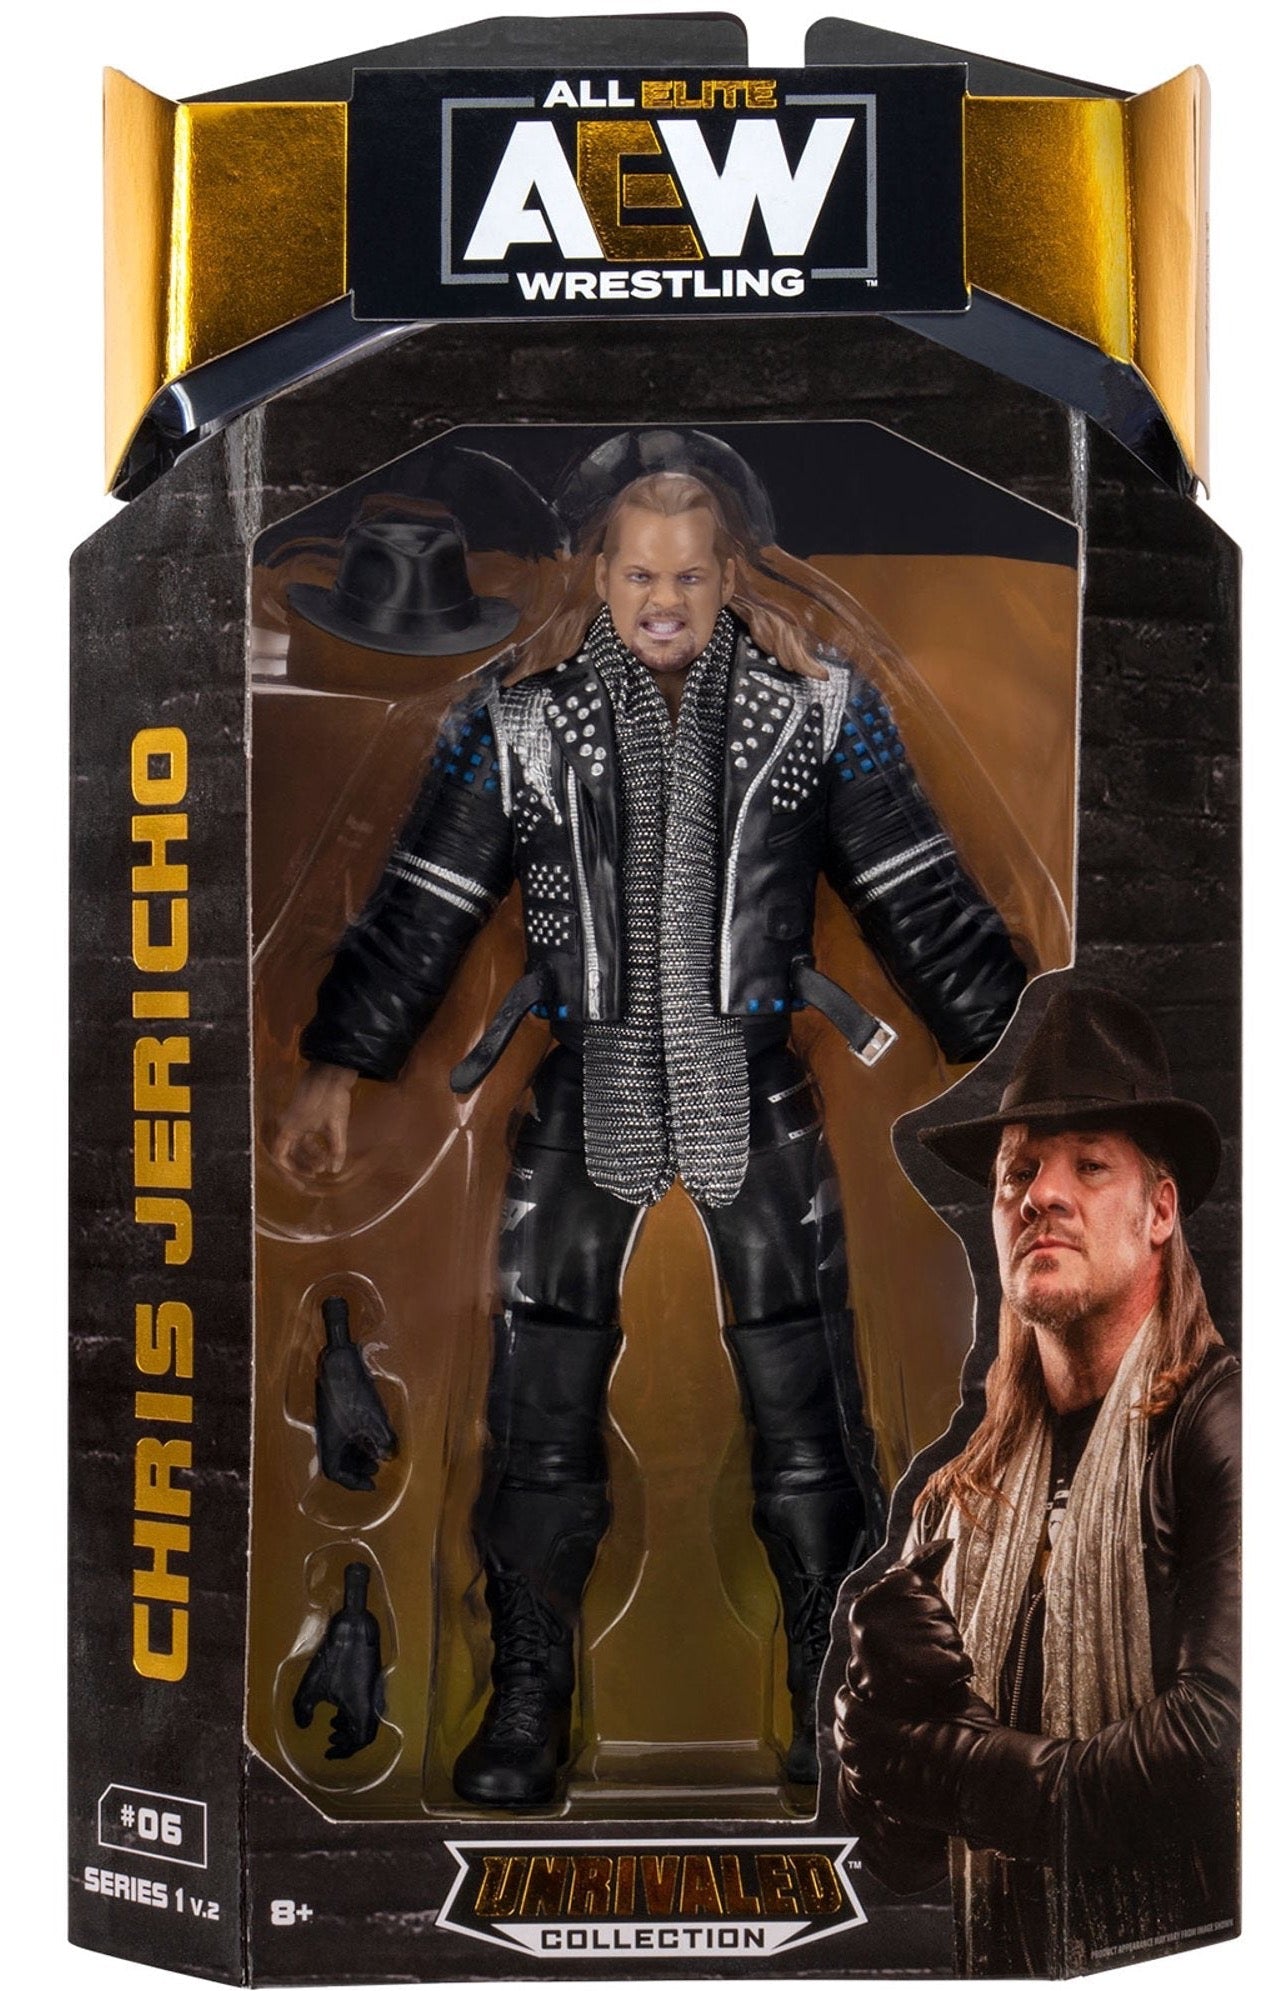 2021 AEW Jazwares Unrivaled Collection Series 1B #06 Chris Jericho